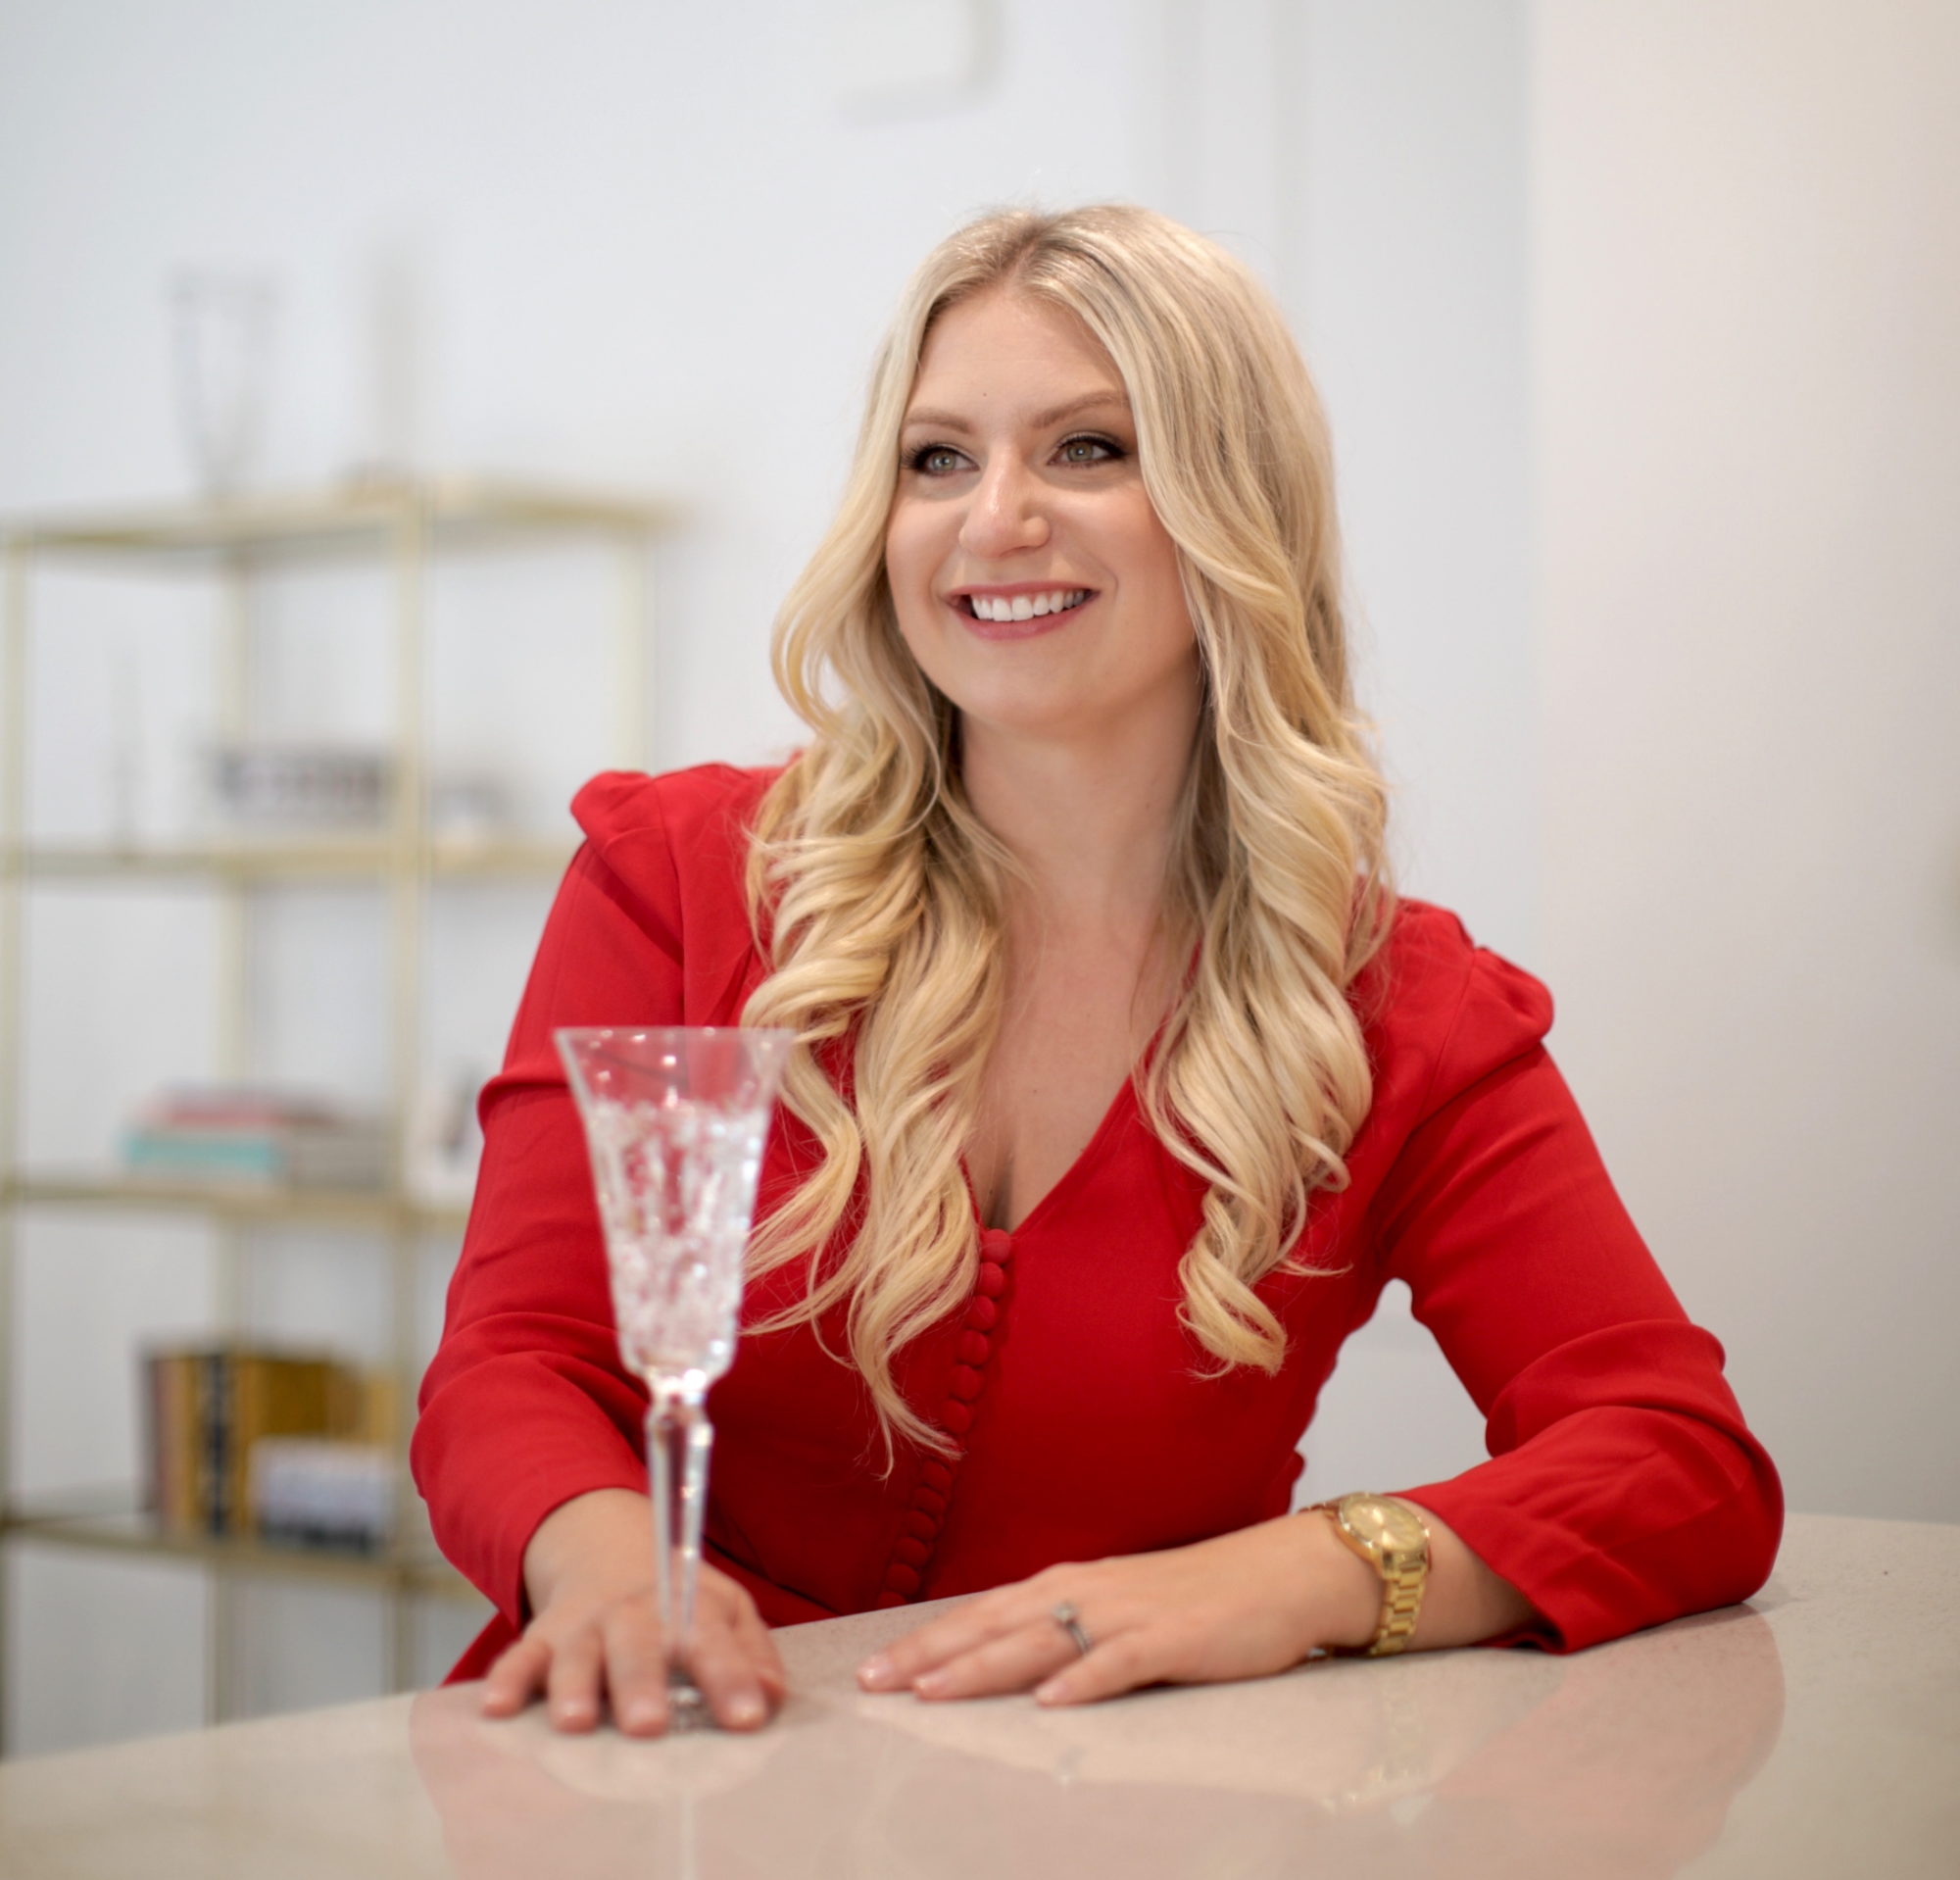 Emily Williams holding a champagne glass and wearing a red blazer